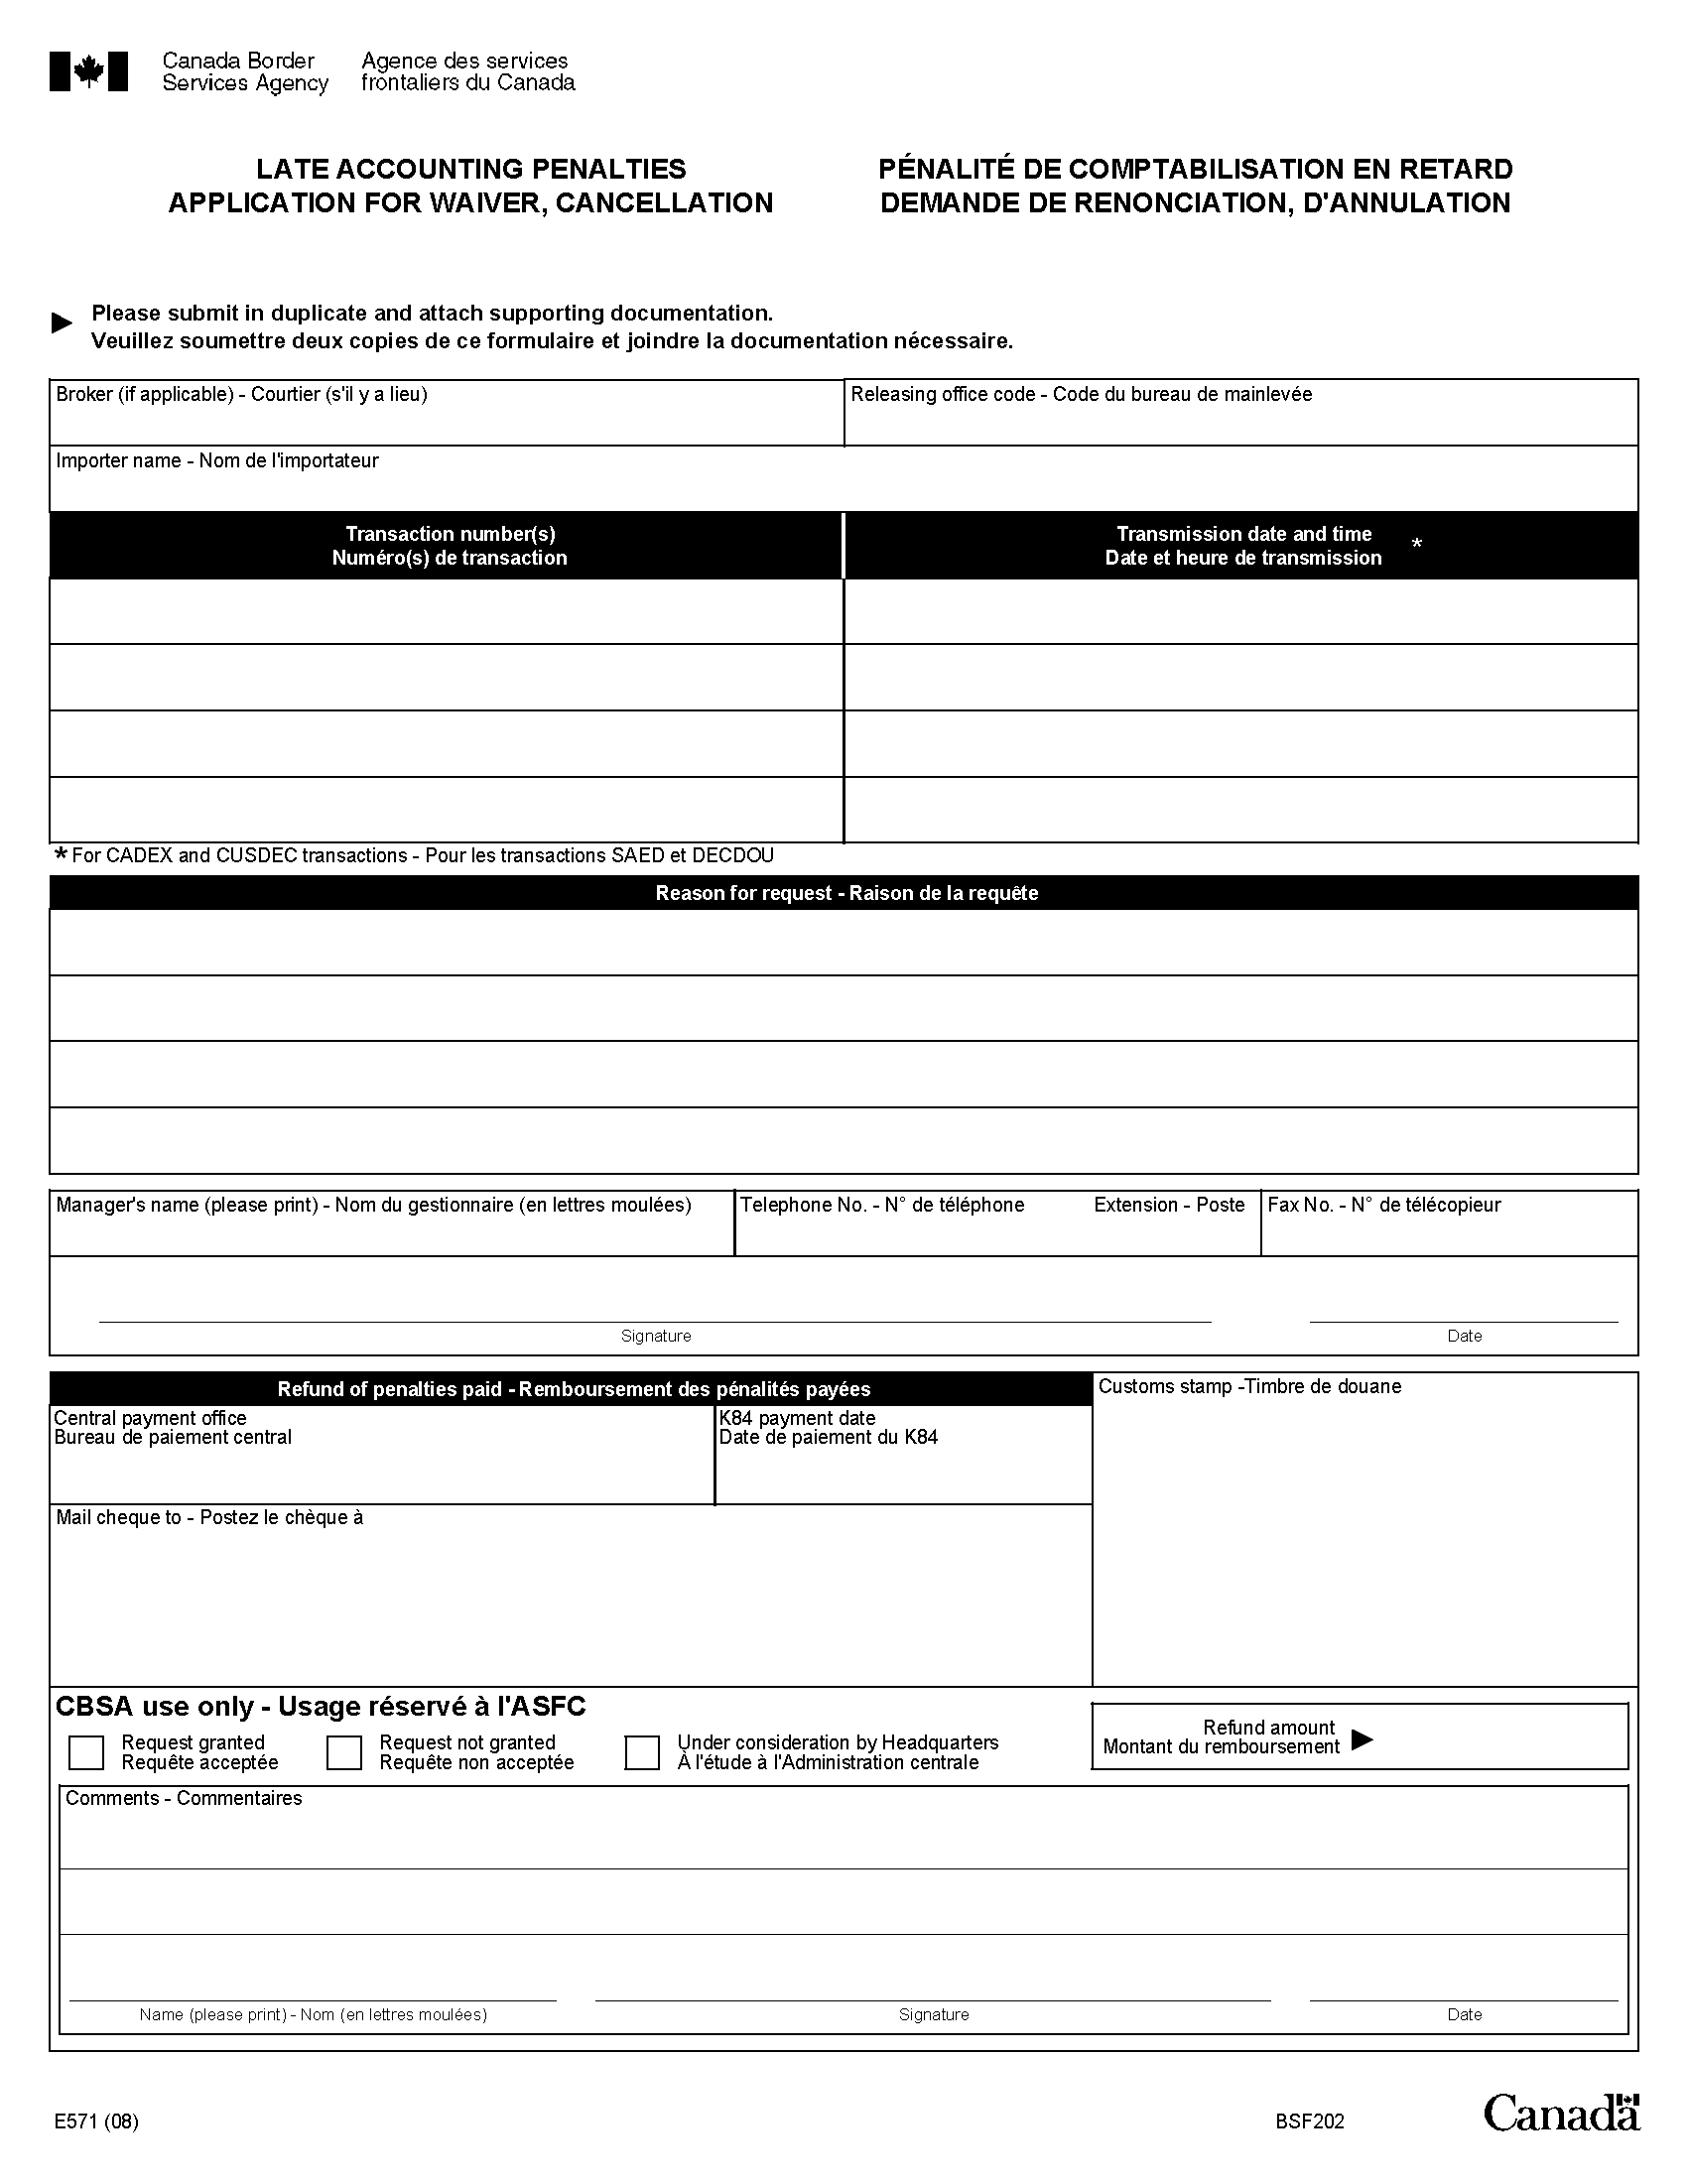 FORM E571, LATE ACCOUNTING PENALTIES APPLICATION FOR WAIVER, CANCELLATION